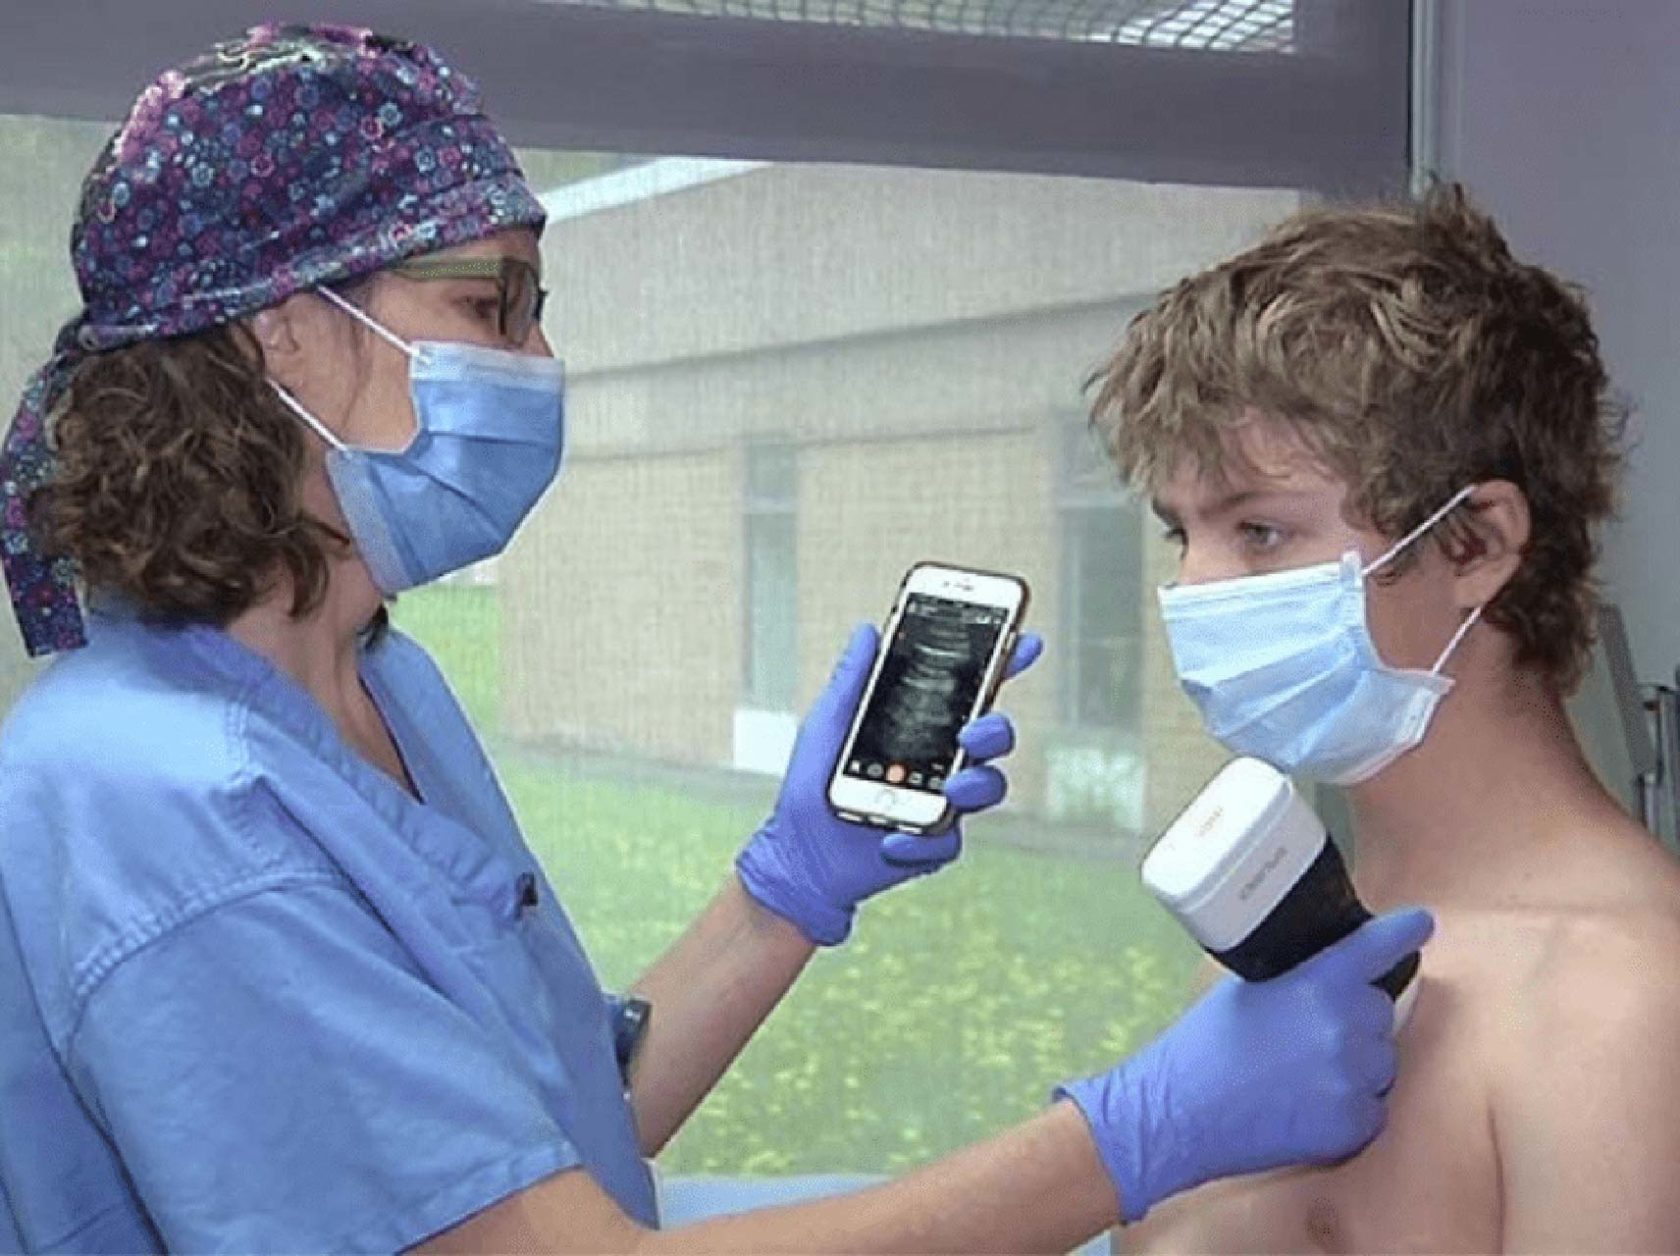 Enhancing rural healthcare with mobile ultrasound scanners